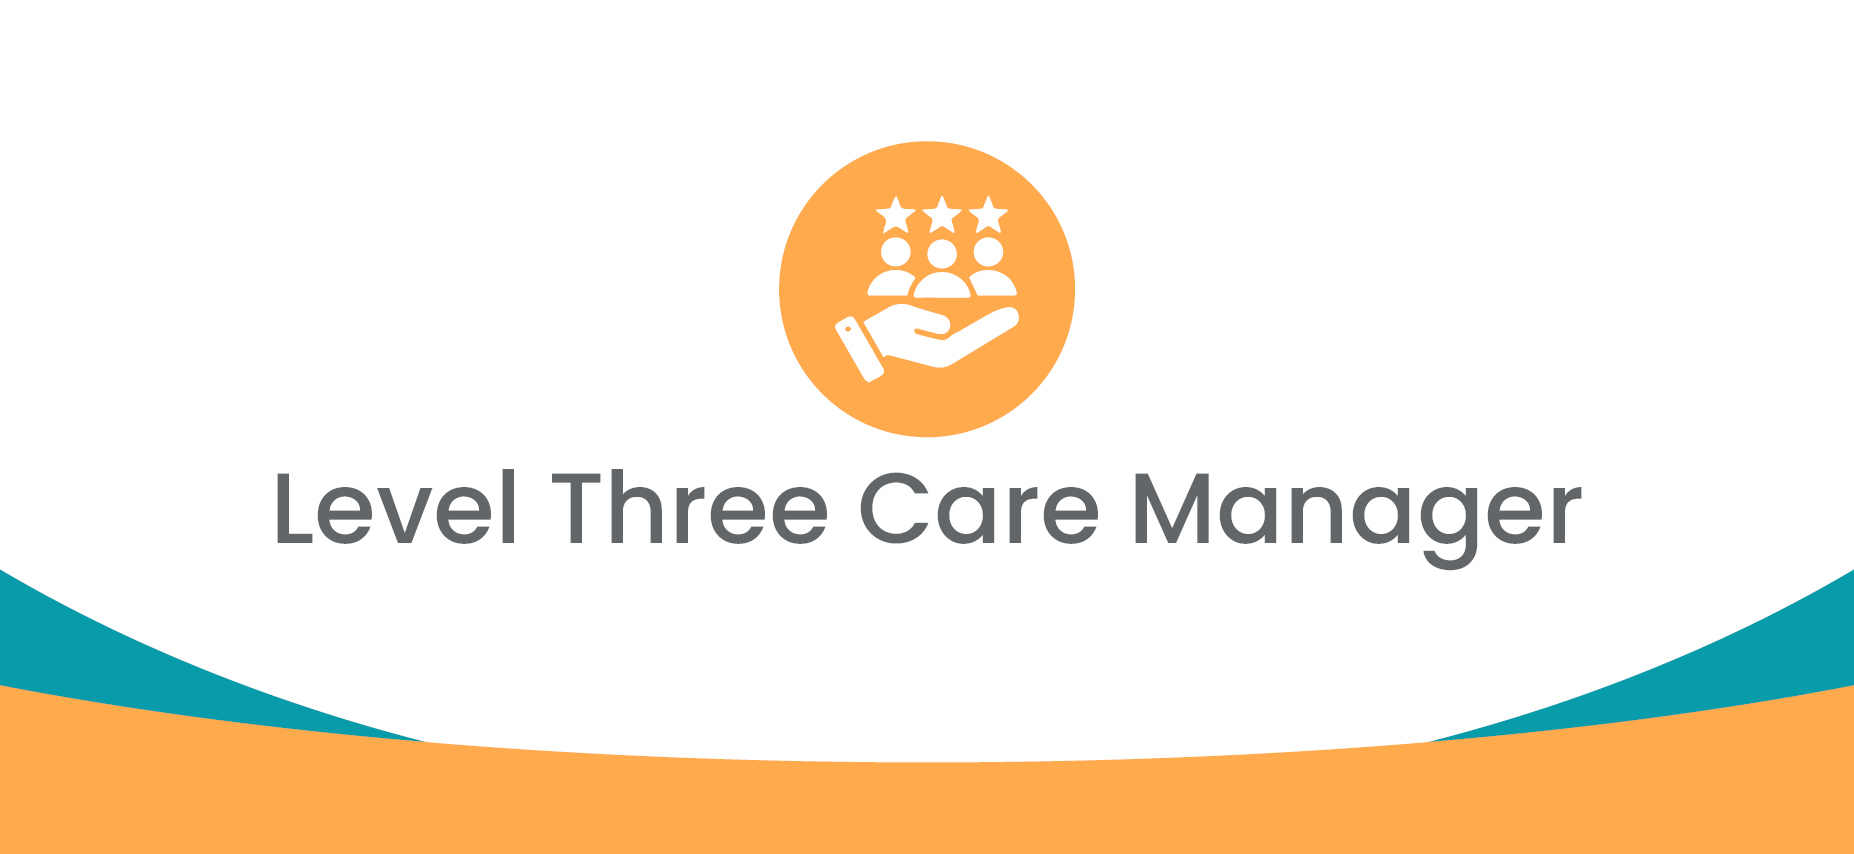 Level Three Care Manager